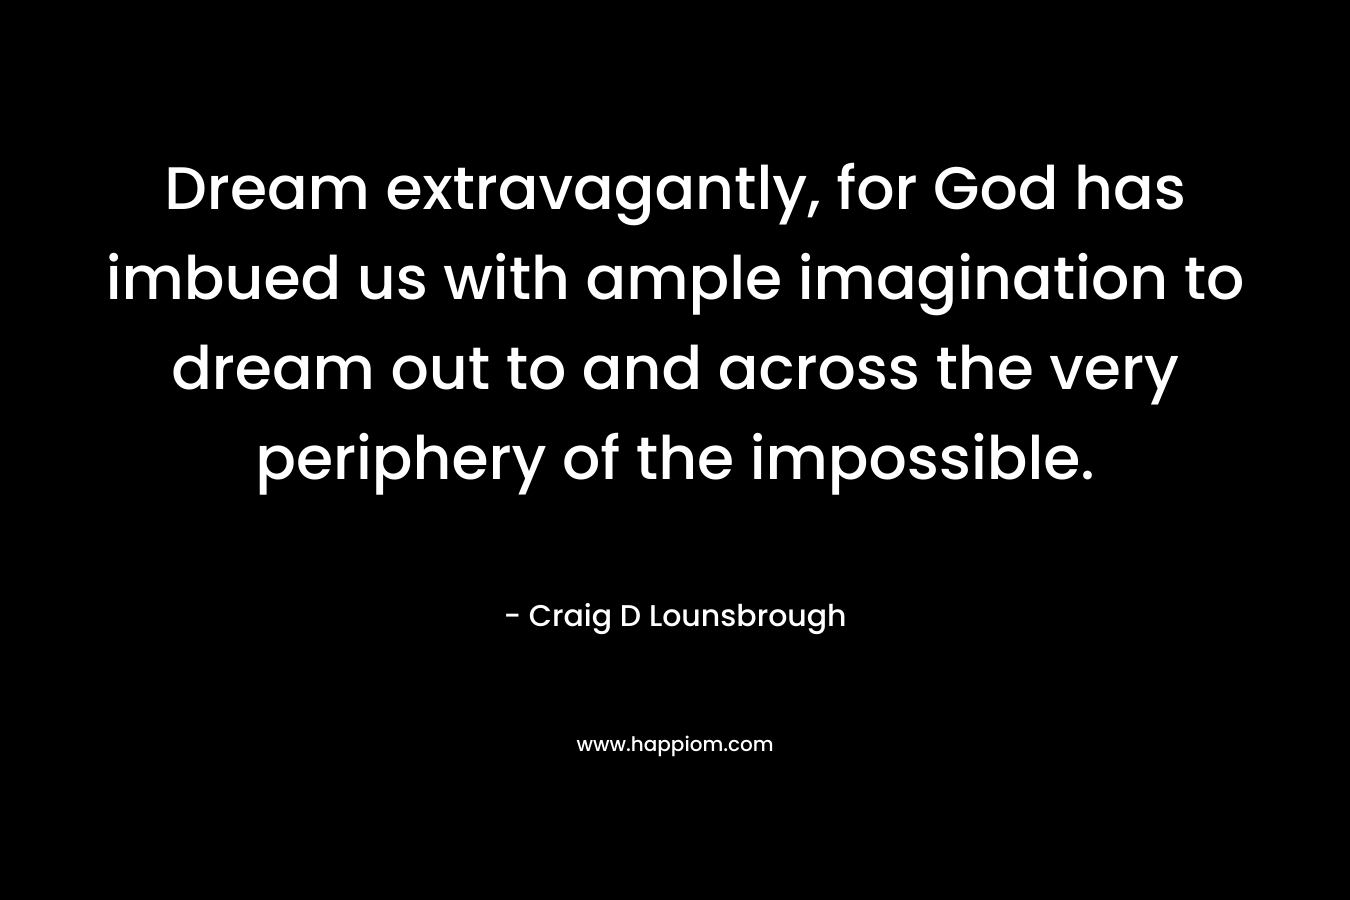 Dream extravagantly, for God has imbued us with ample imagination to dream out to and across the very periphery of the impossible.